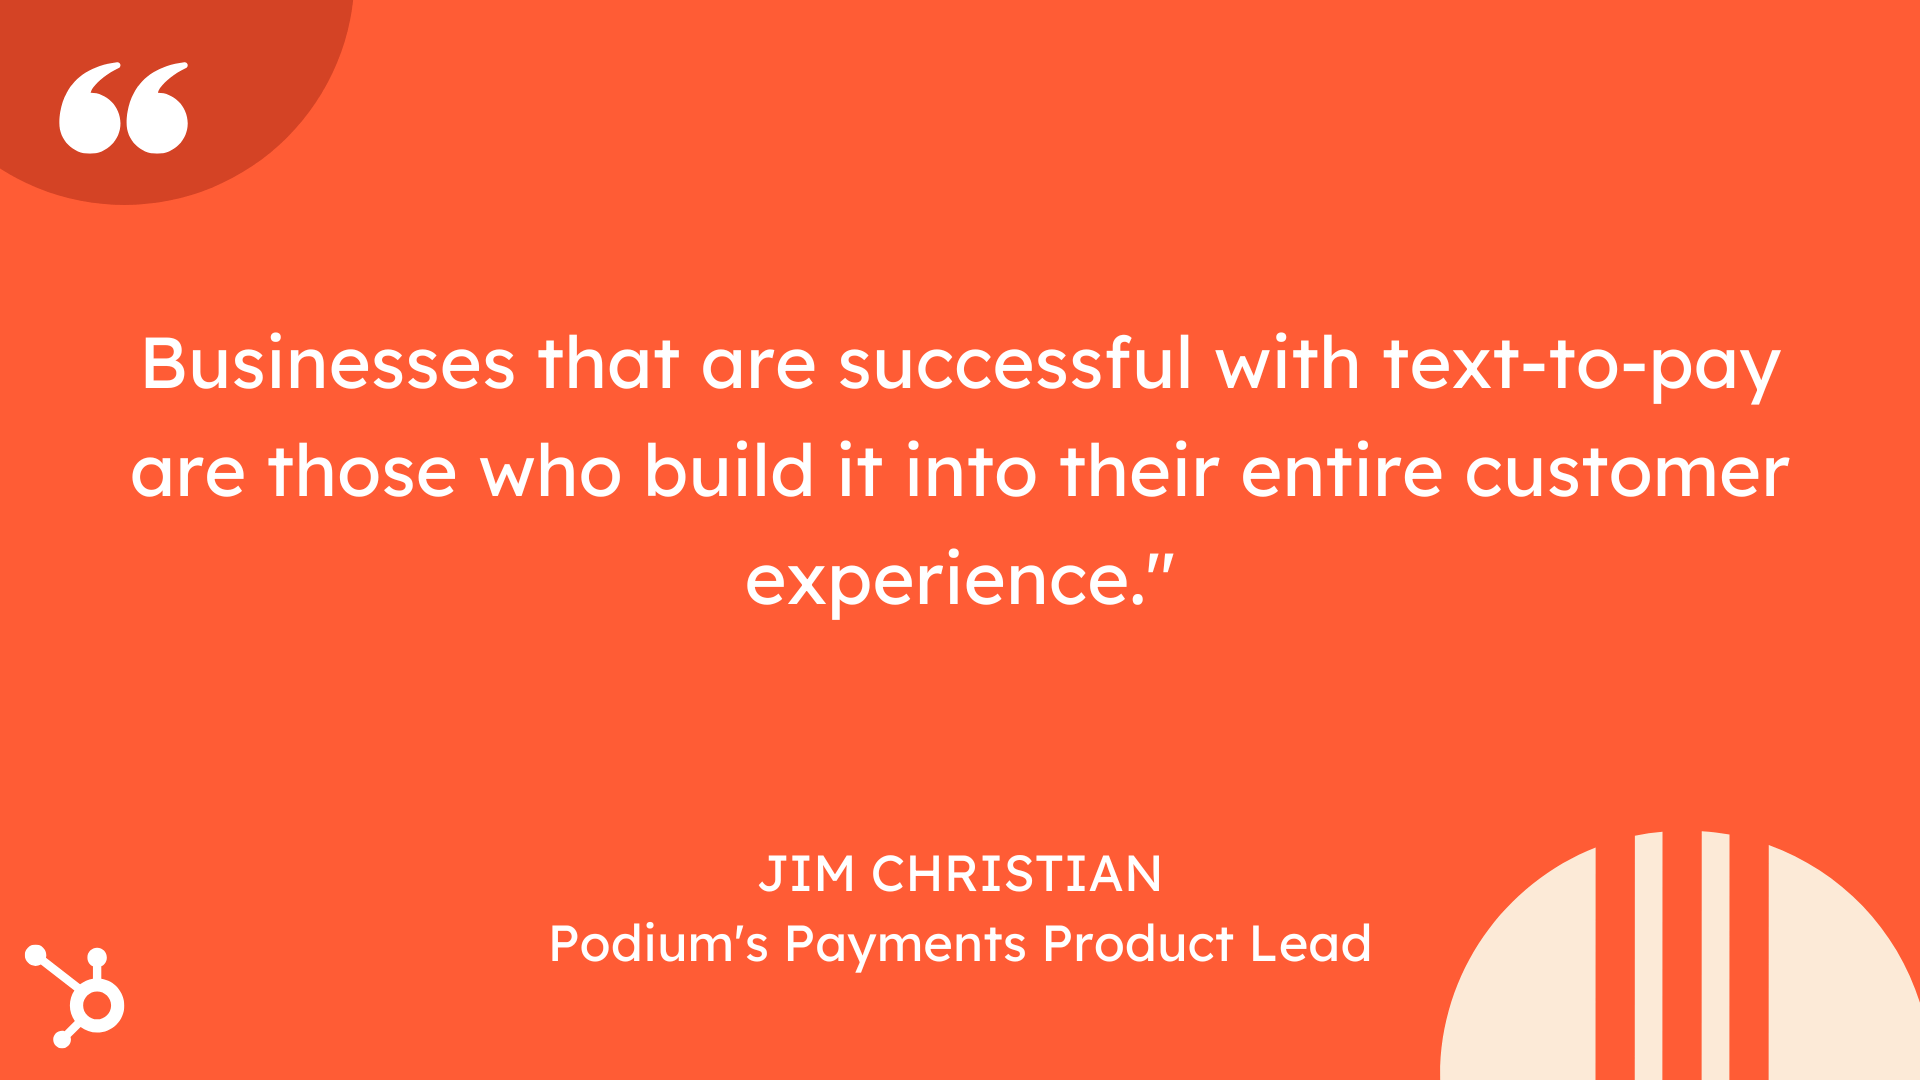 jim christian quote on text to pay